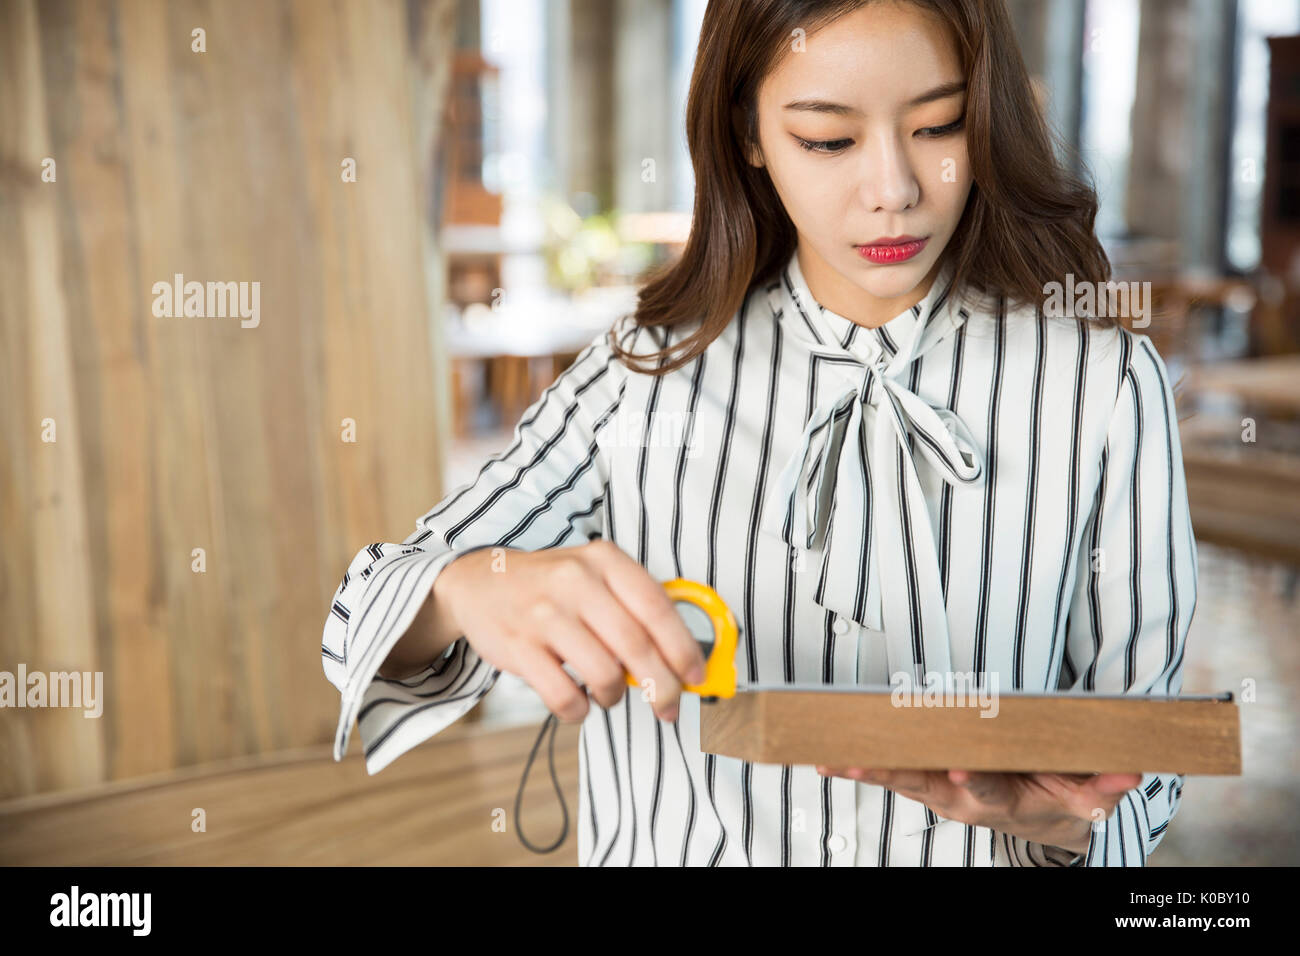 Portrait of young businesswoman measuring wood Stock Photo